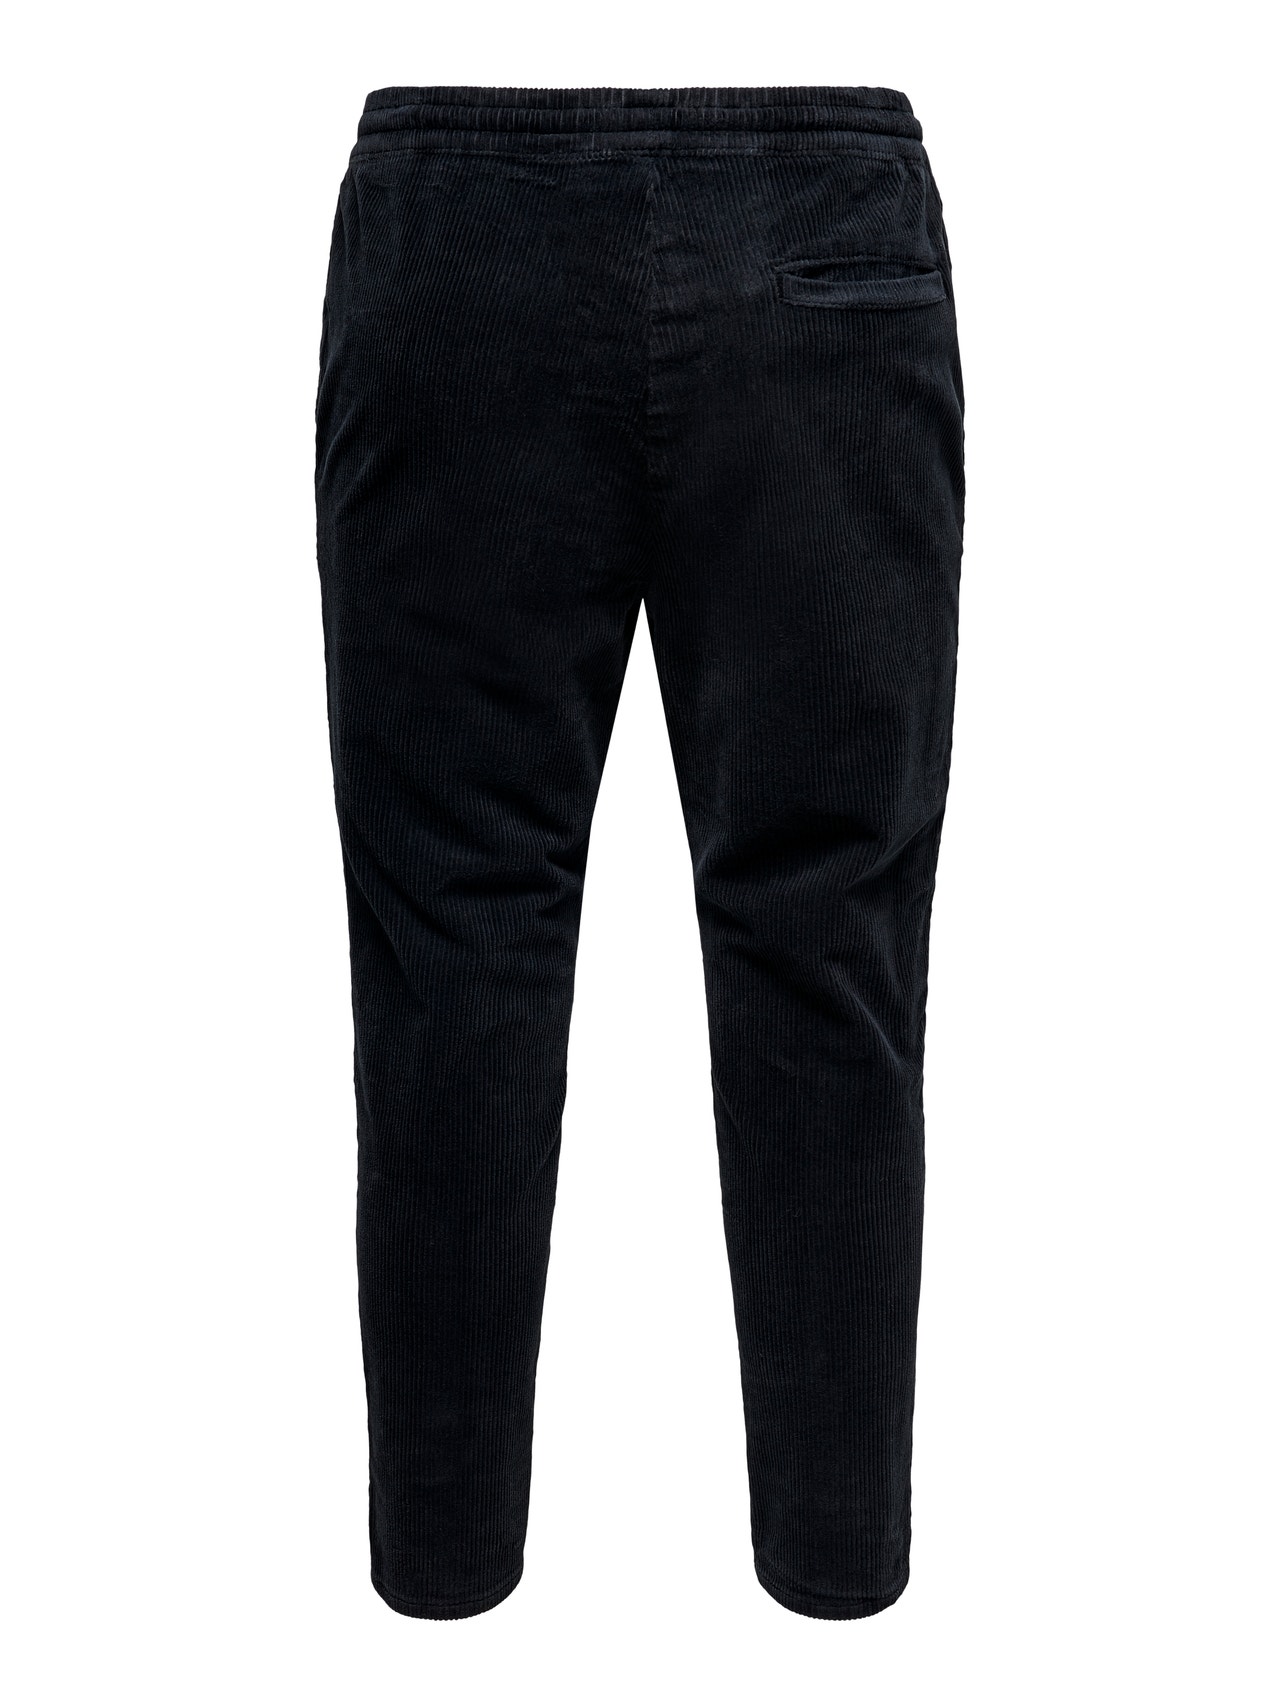 ONLY & SONS Tapered Fit Mid rise Elasticated hems Trousers -Black - 22019912